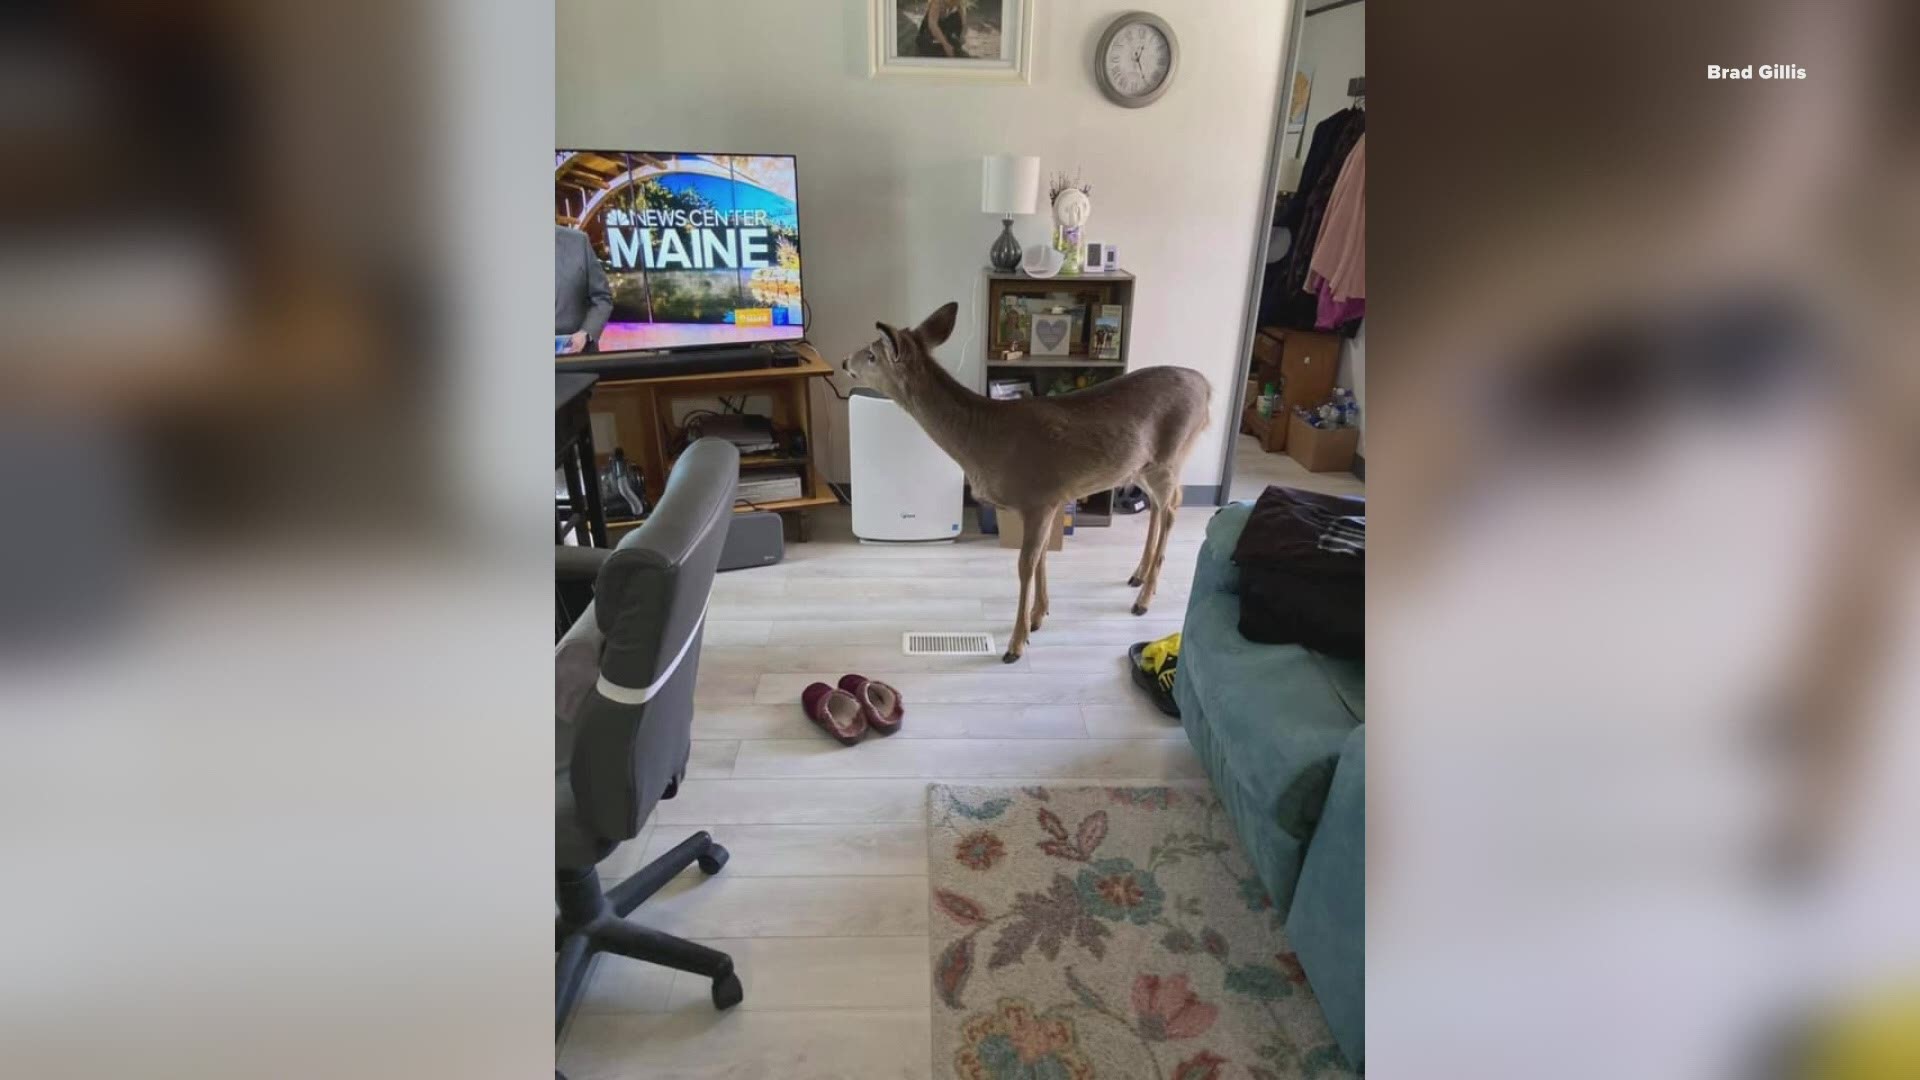 Brad Gillis was watching News Center Maine on Monday when a deer that frequents his backyard decided to come in and see what was happening in his neck of the woods.